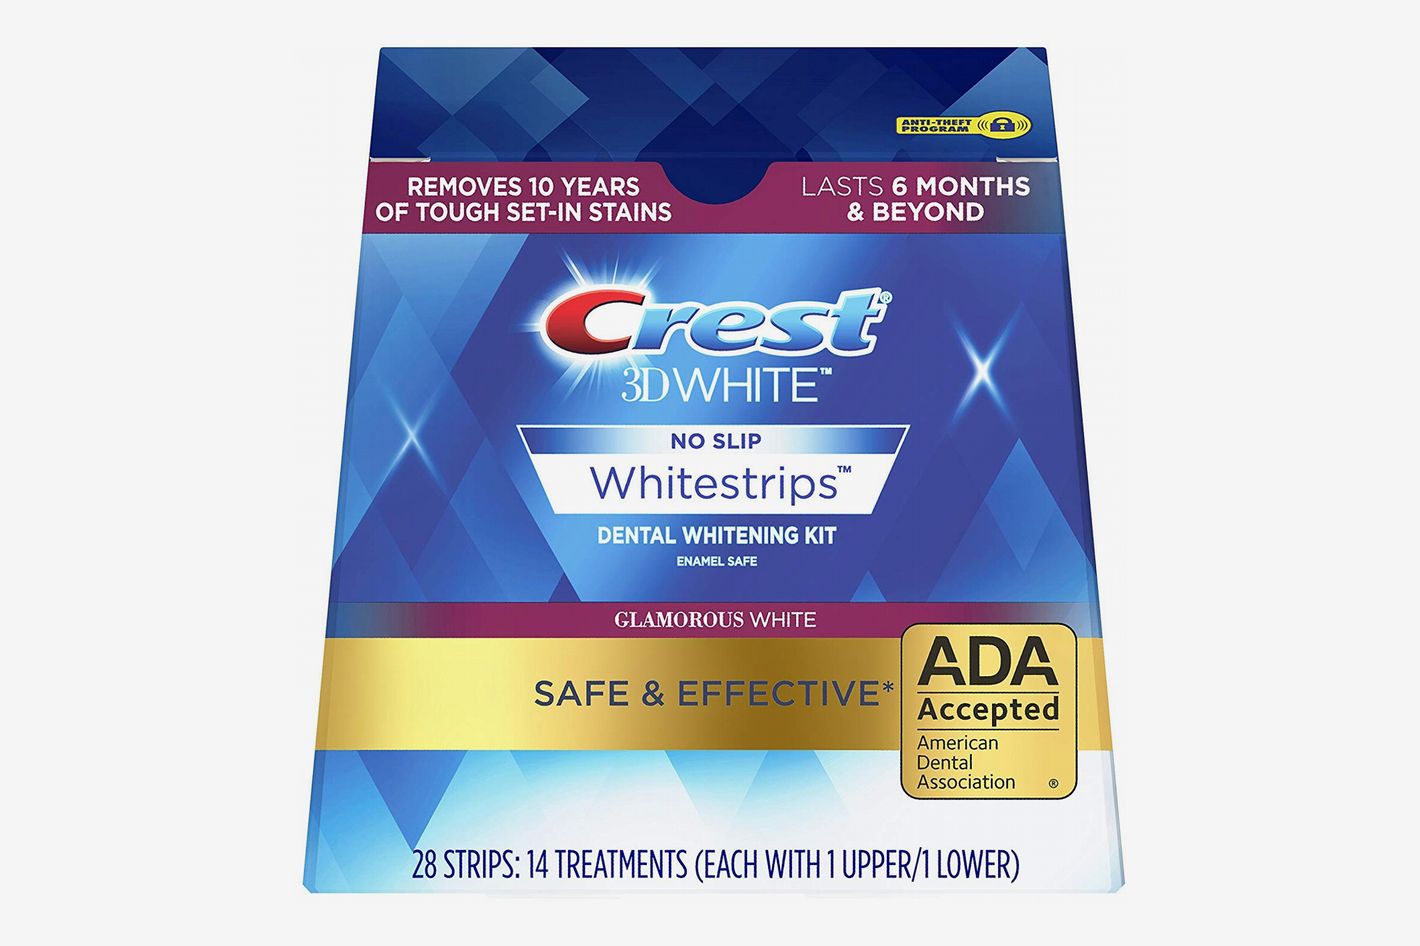 New Wine Wipes Remove Red Wine Stains From Teeth Safely Naturally Convenient USA 